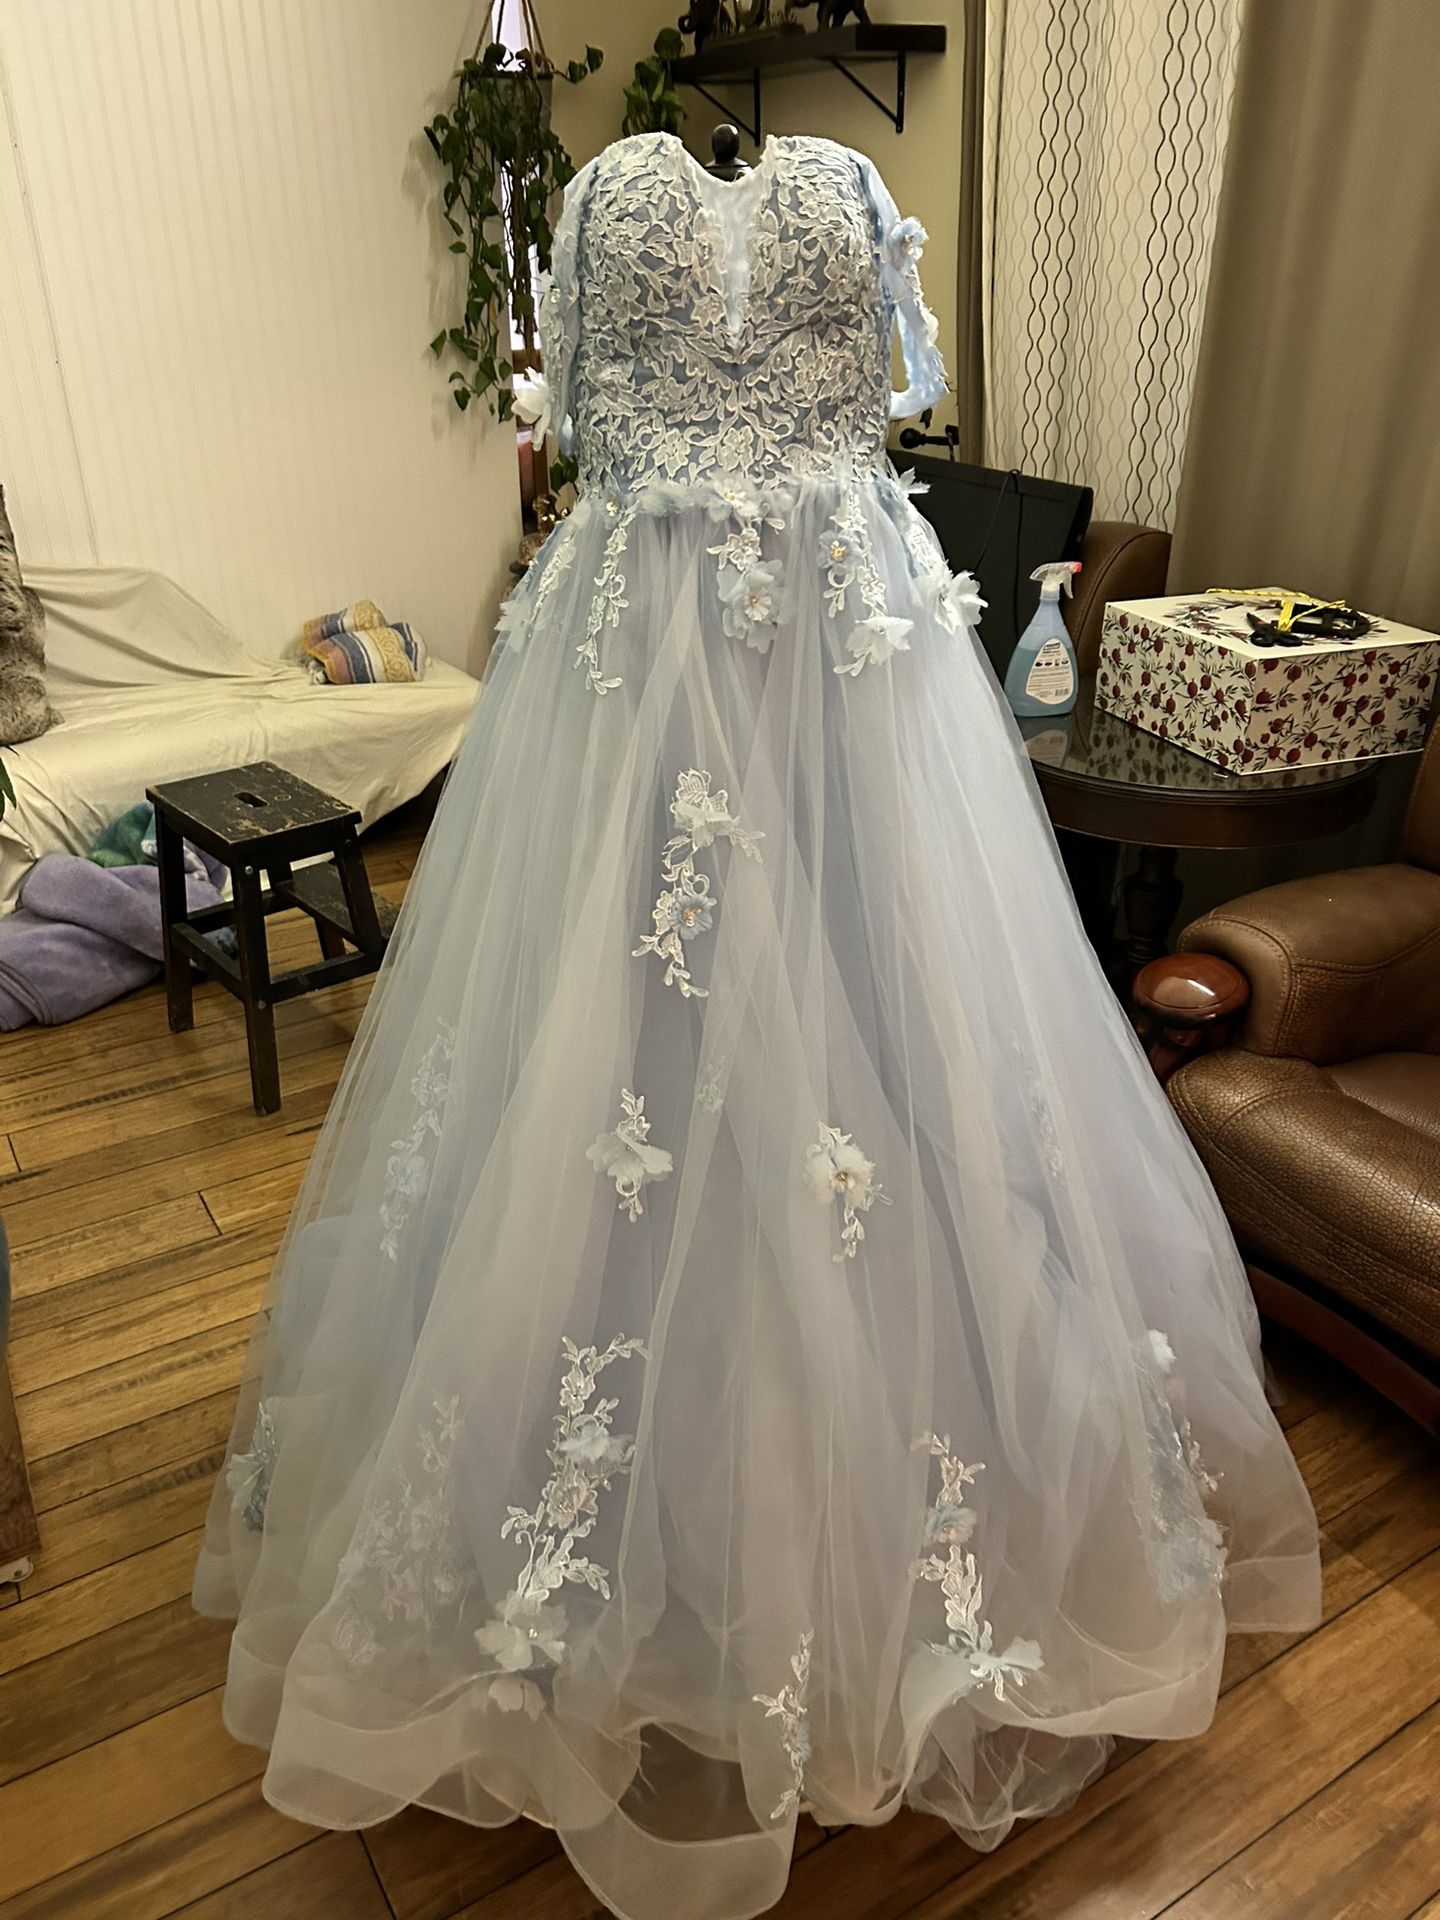 Ball Gown/quinceanera Dress Size 0-4 Adjustable 